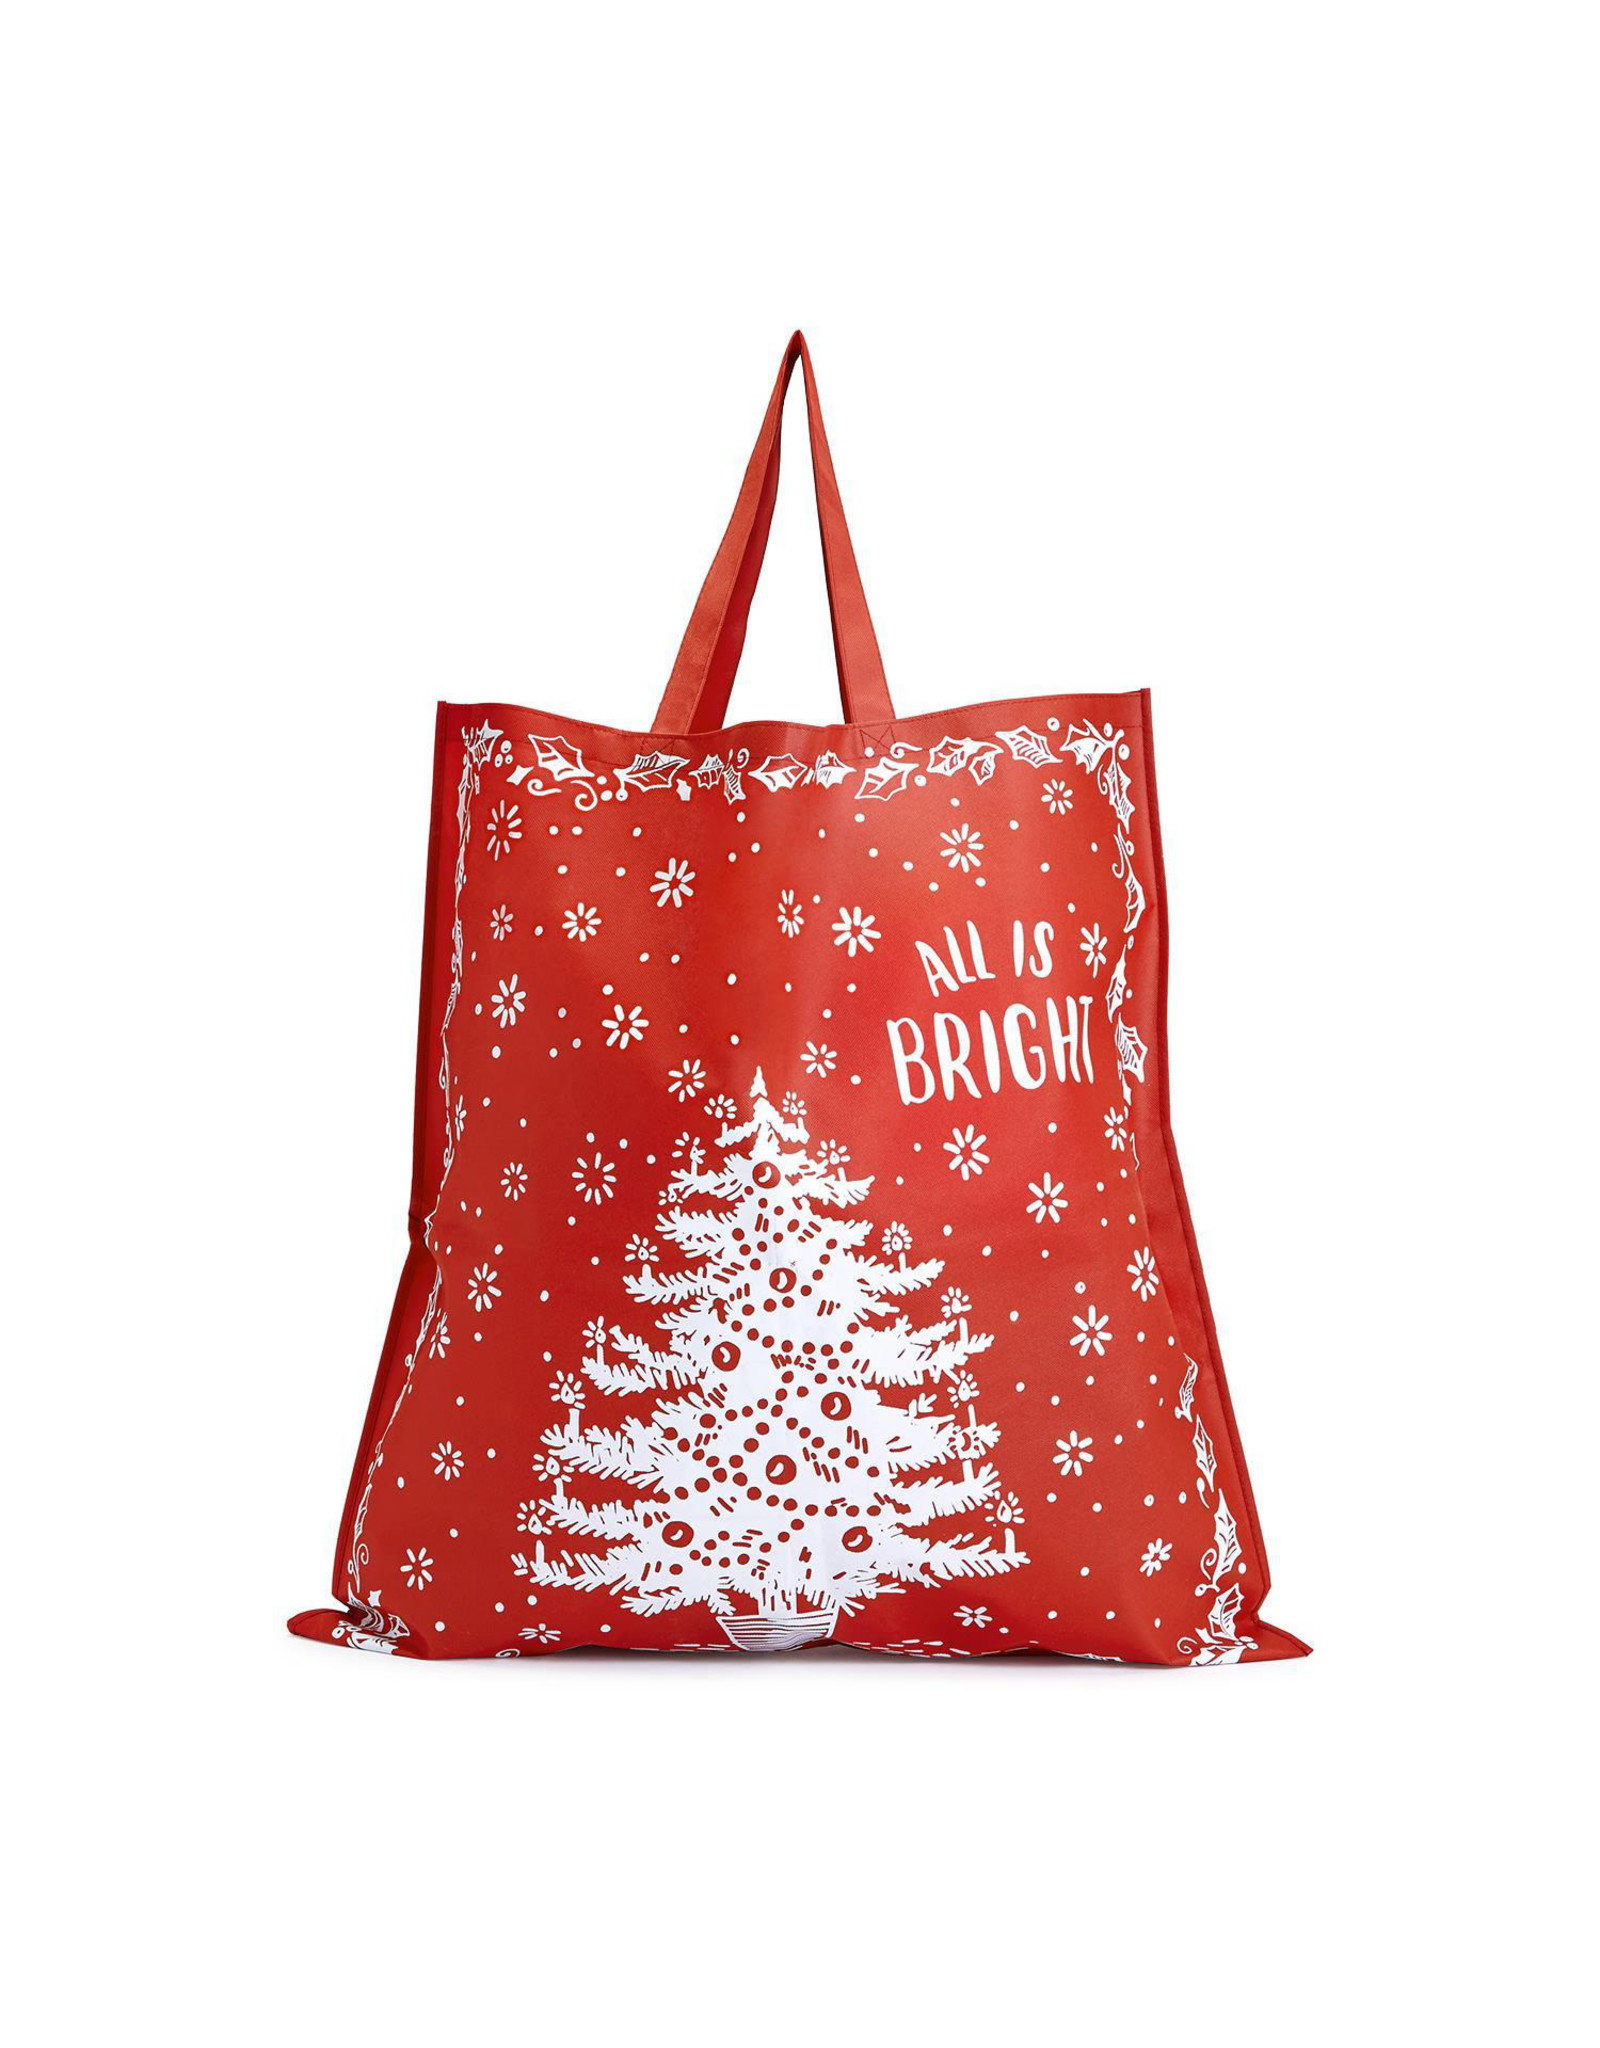 Two's Company "All Is Bright" Oversized Christmas Tote Bag